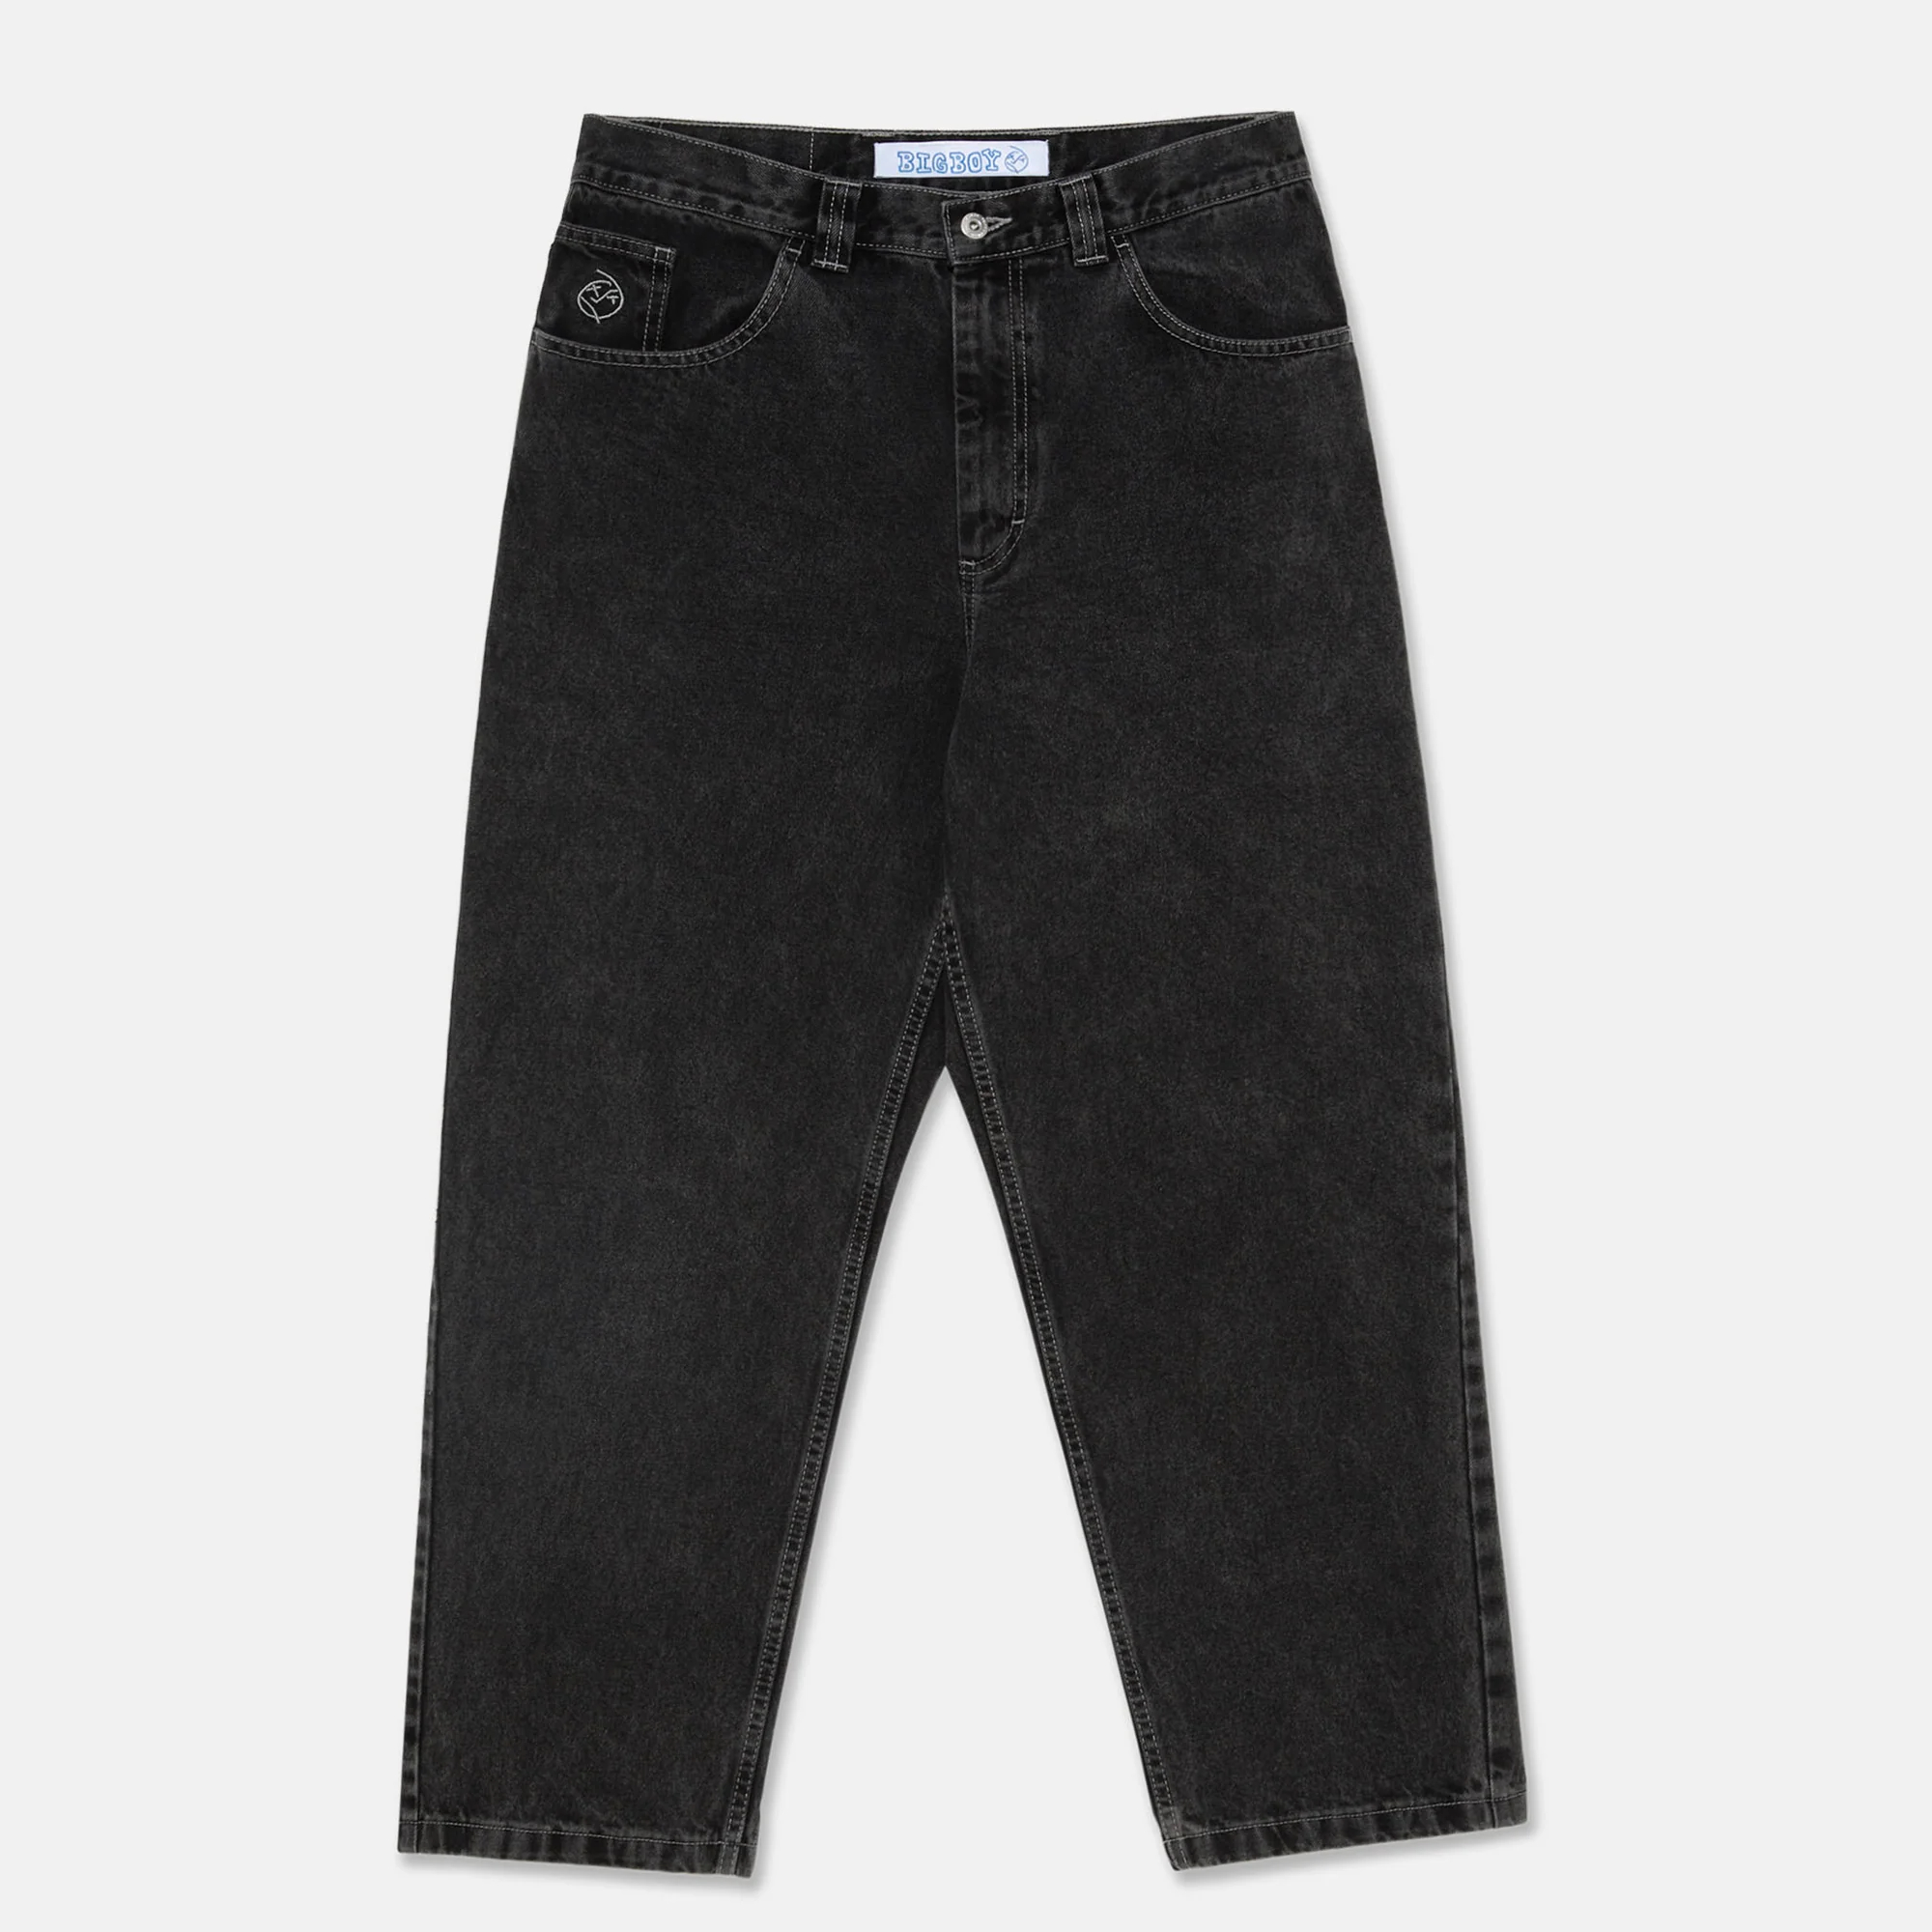 Boys black jeans are a versatile and essential wardrobe staple that can be styled in numerous ways to create a variety of fashionable and chic looks.